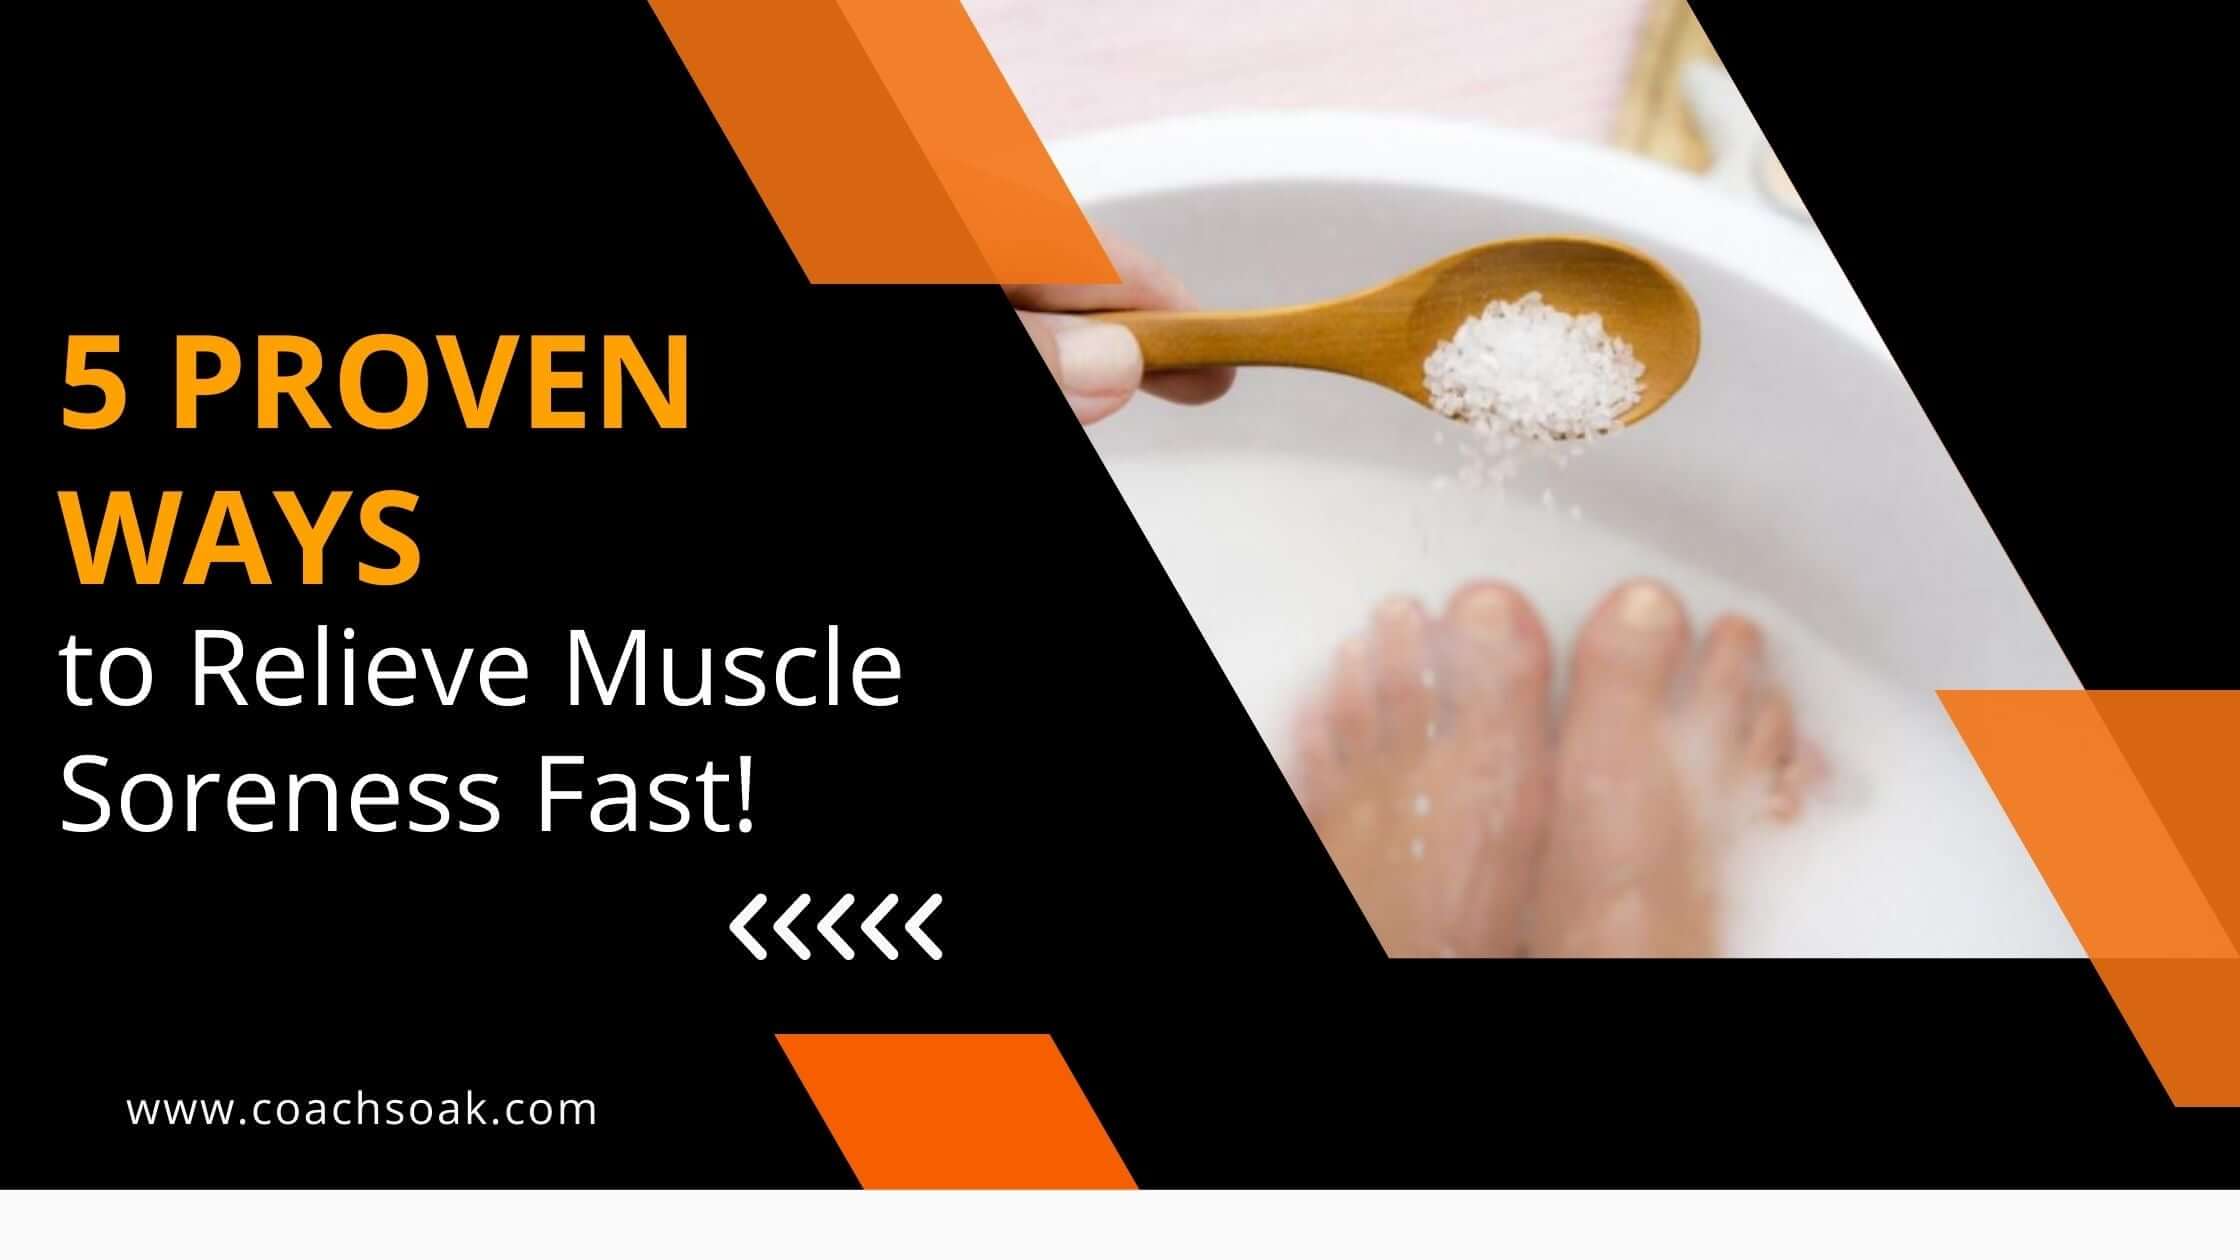 5 Proven Ways on How to Relieve Muscle Soreness Fast